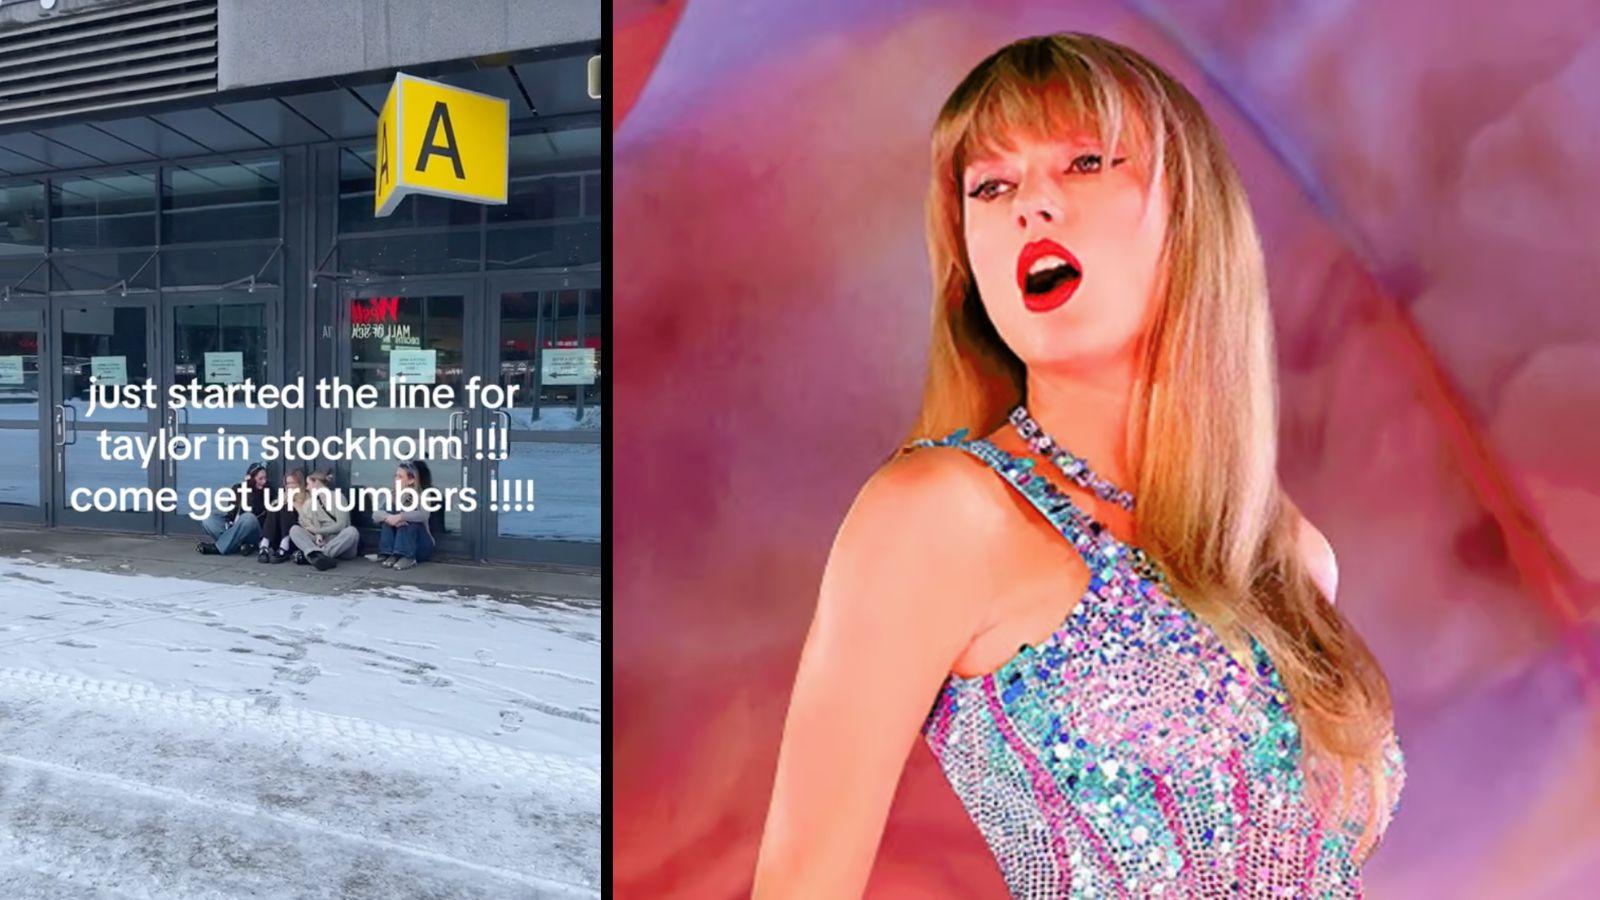 Fans start queue for Taylor Swift concert 4 months in advance